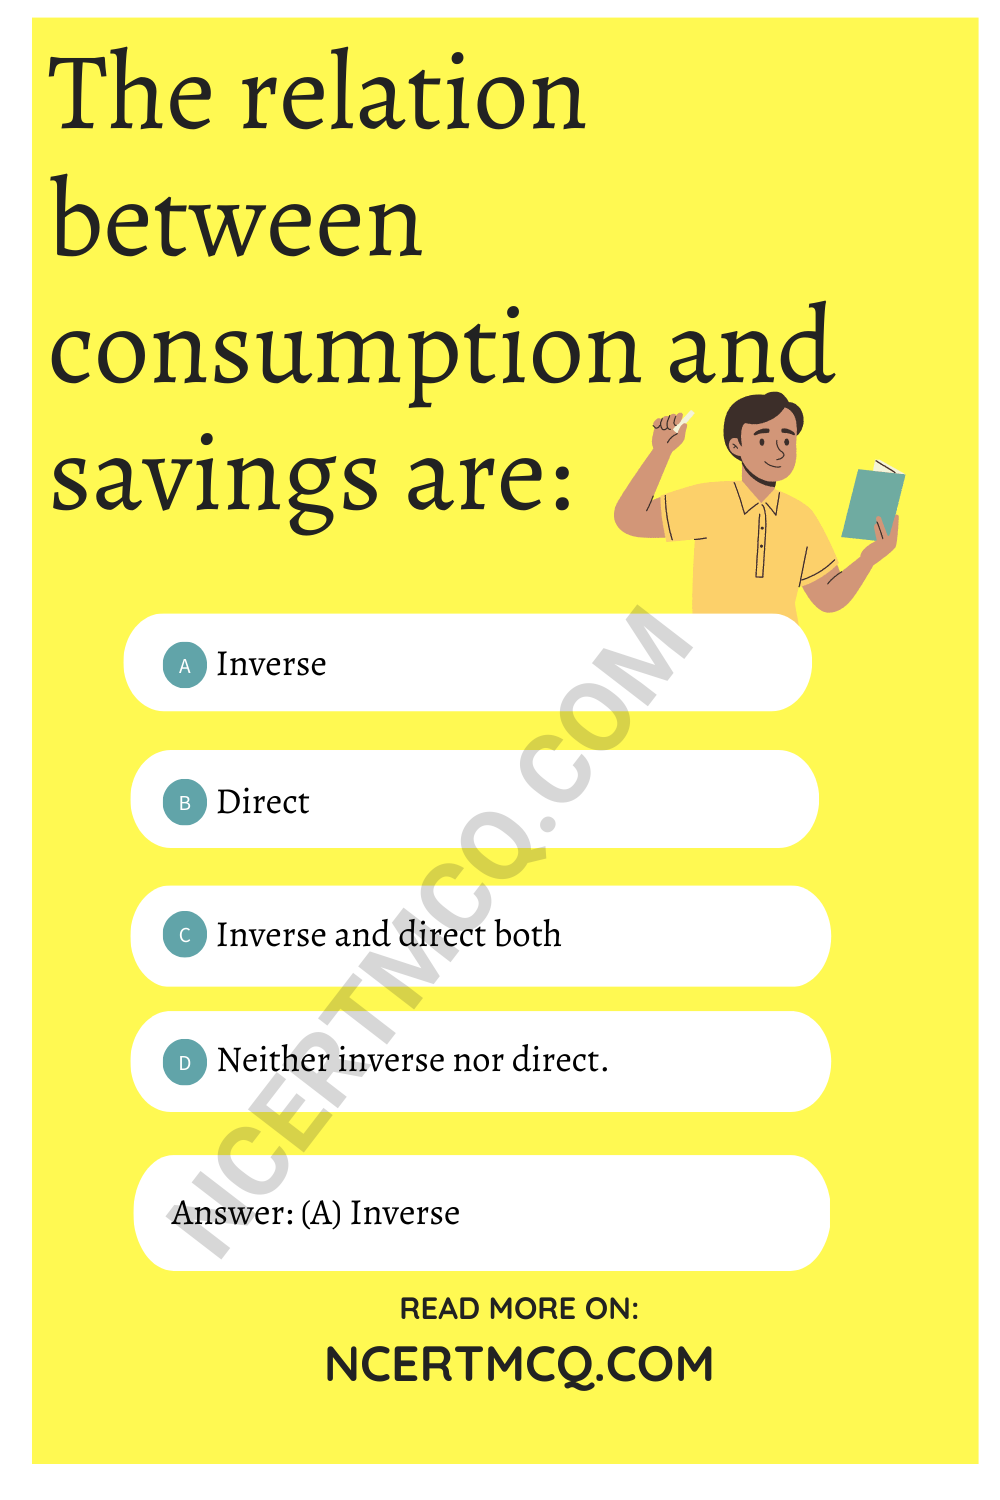 The relation between consumption and savings are: